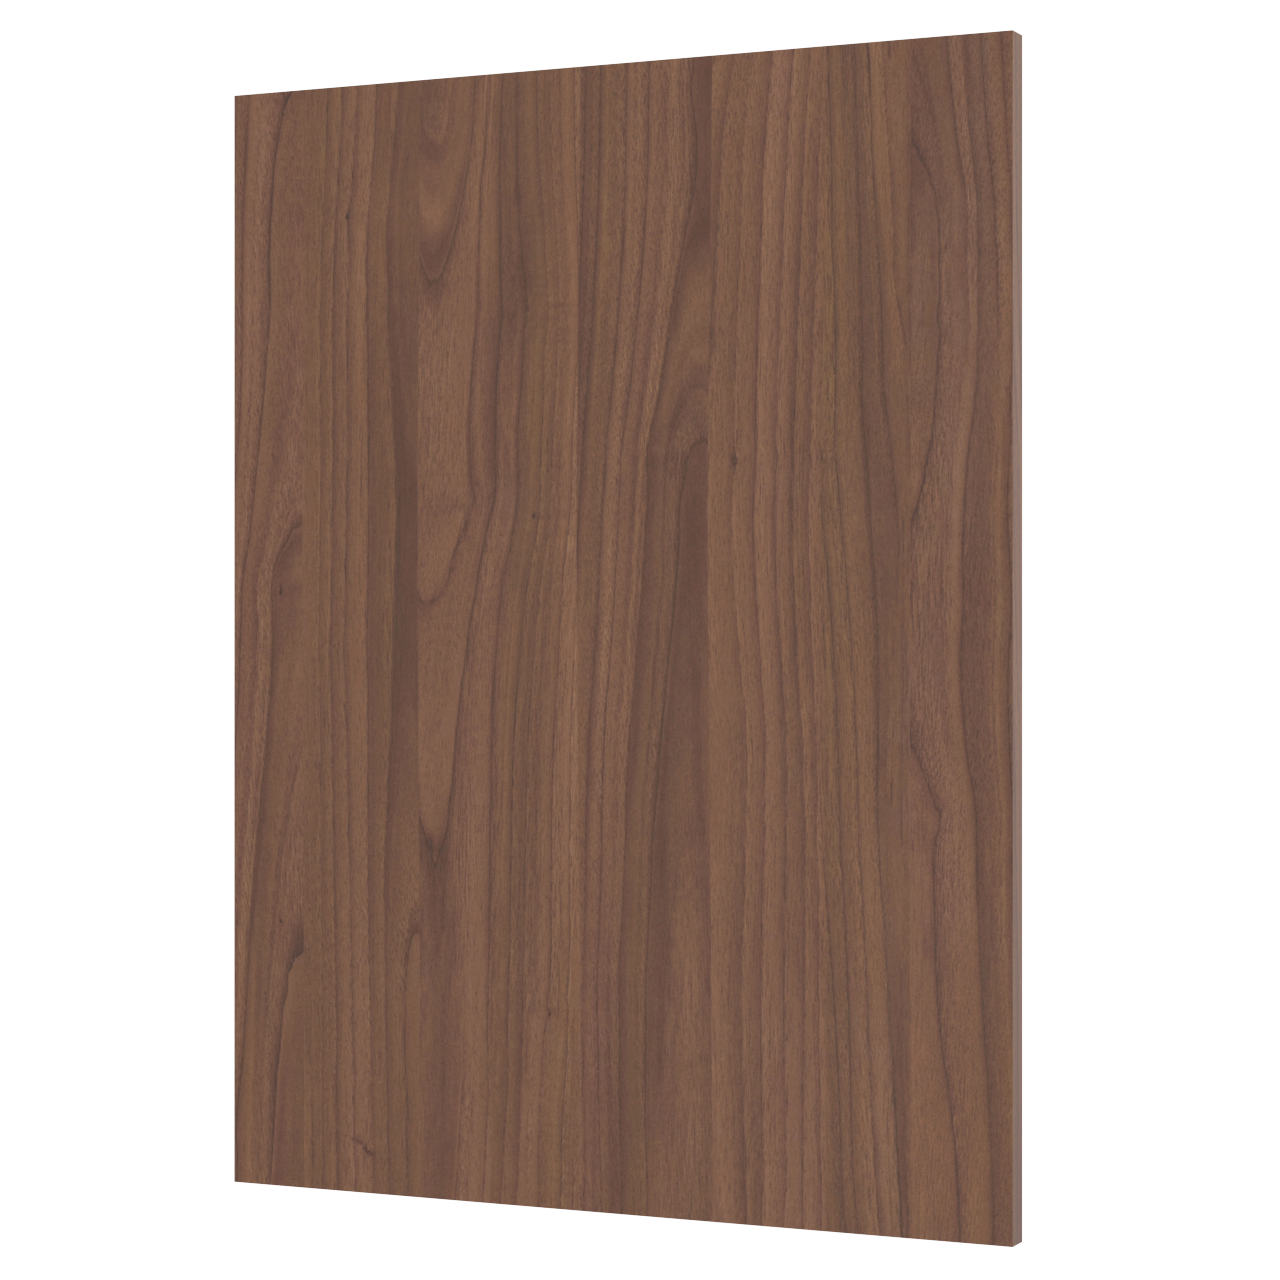 Cover Panels & plinths Walnut - fronts by sweden